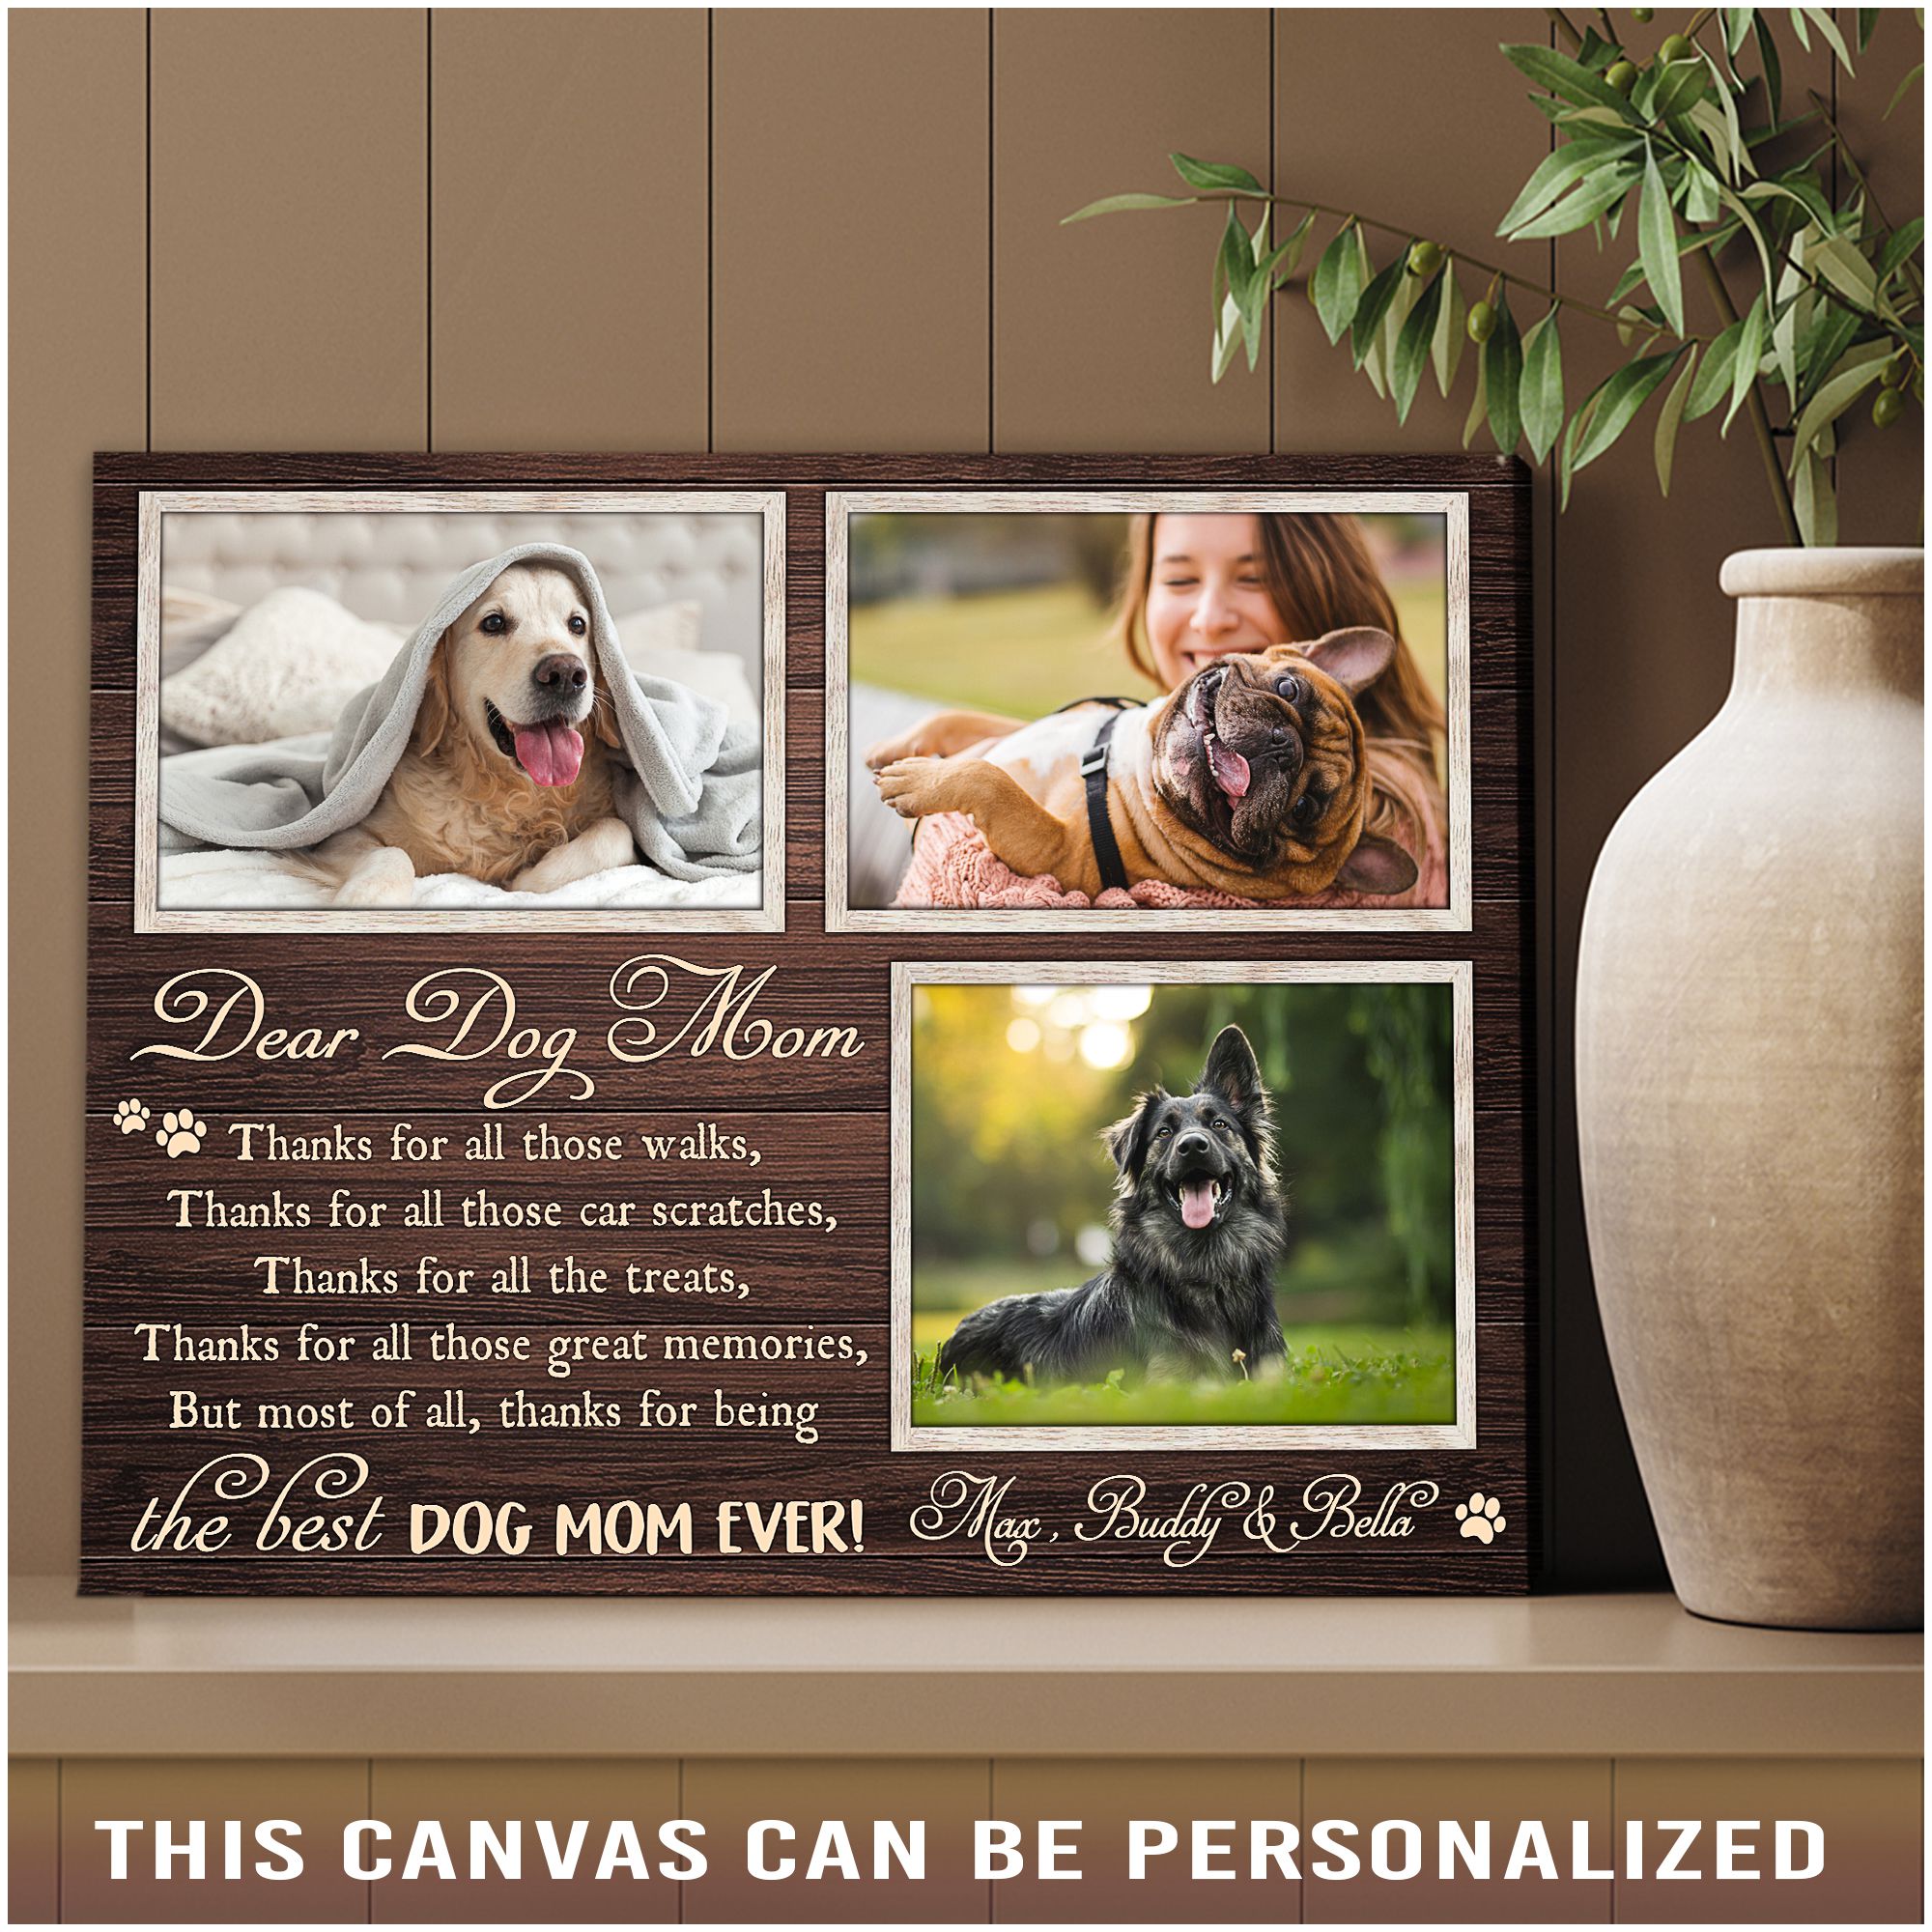 https://images.ohcanvas.com/ohcanvas_com/2022/07/24201910/dog-mom-gift-ideas-personalized-dog-owner-gifts.jpg